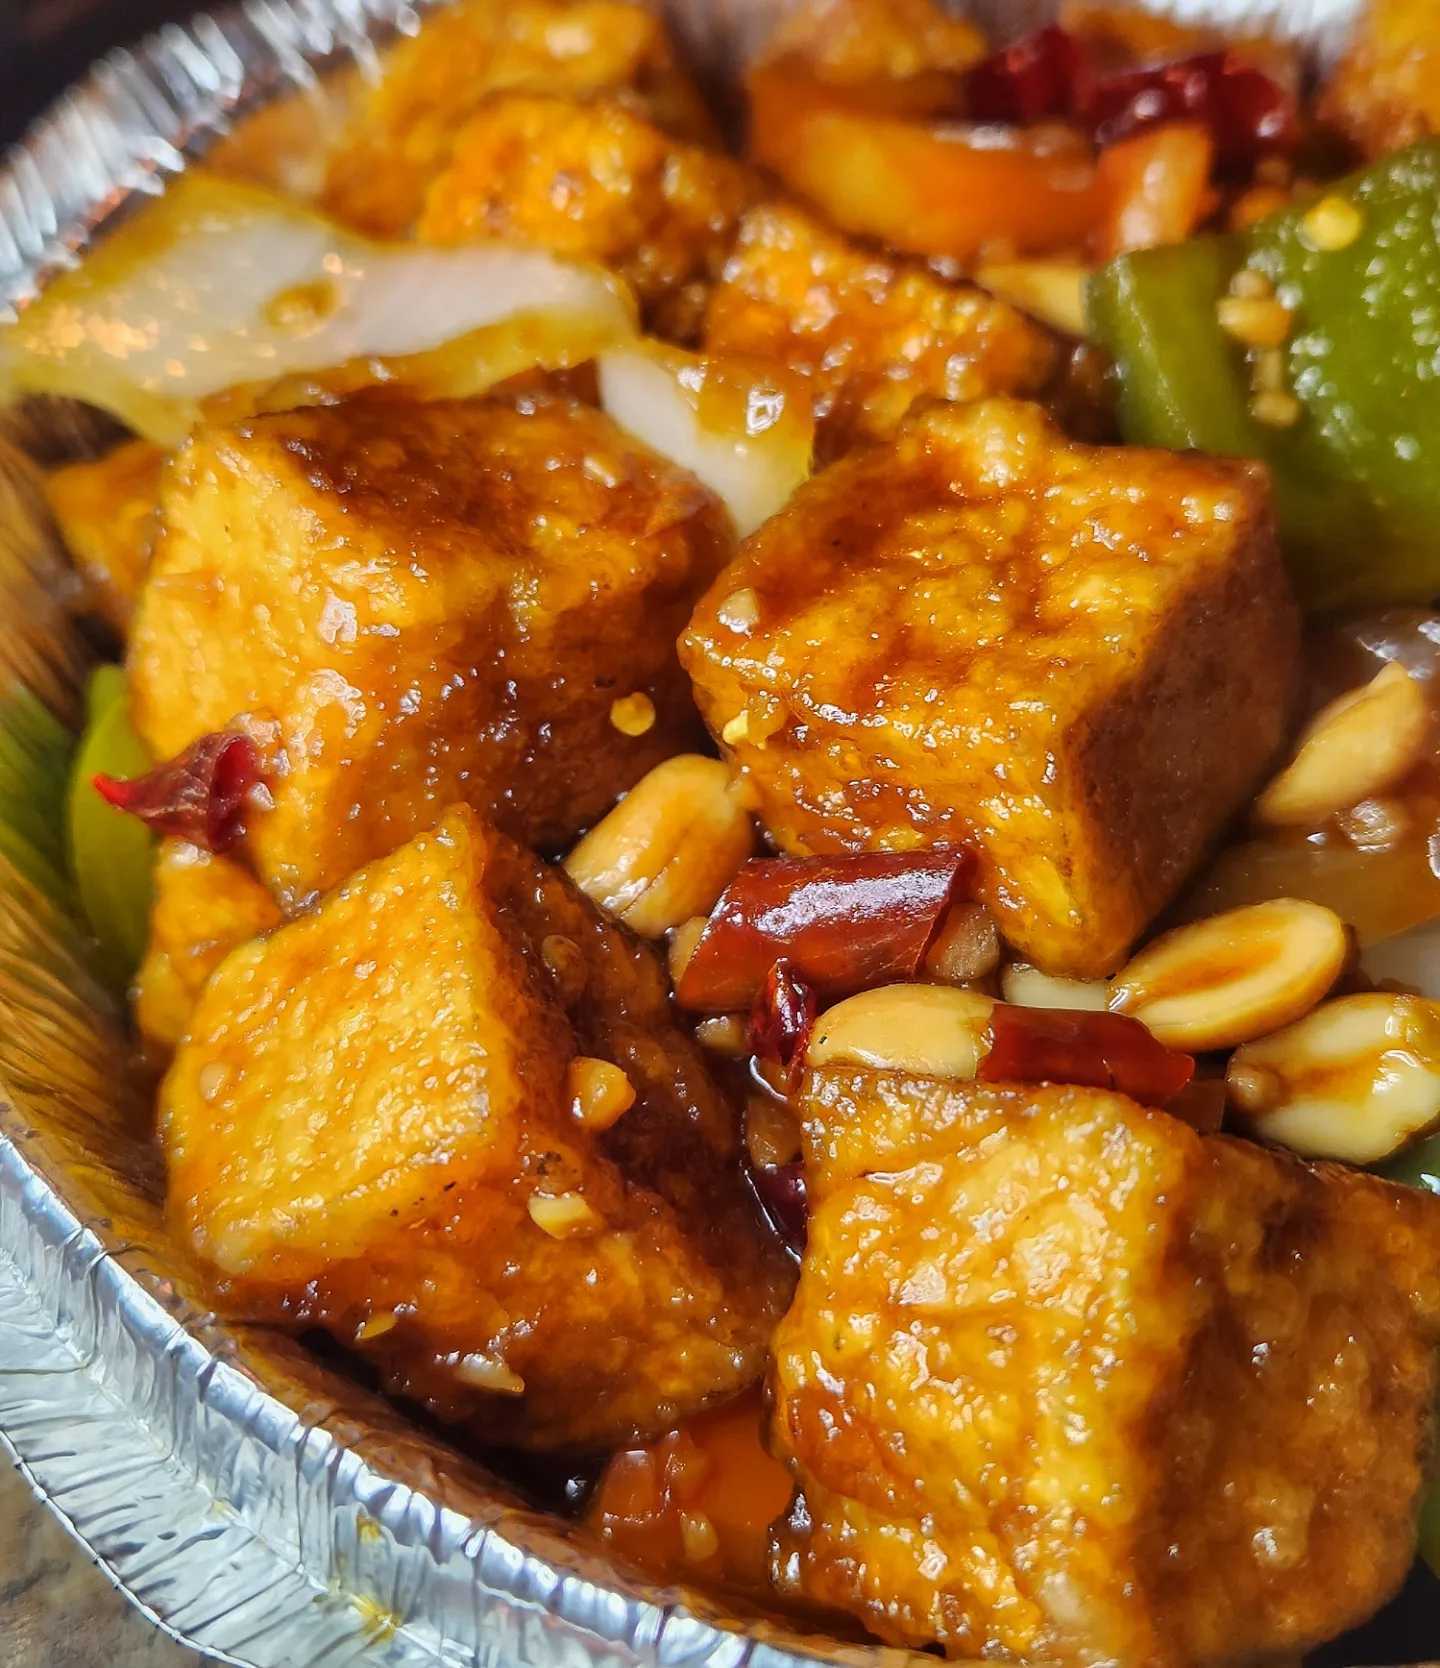 Kung Pao Tofu from Kung Fu Noodle (Photo by Xochitl Gracia)